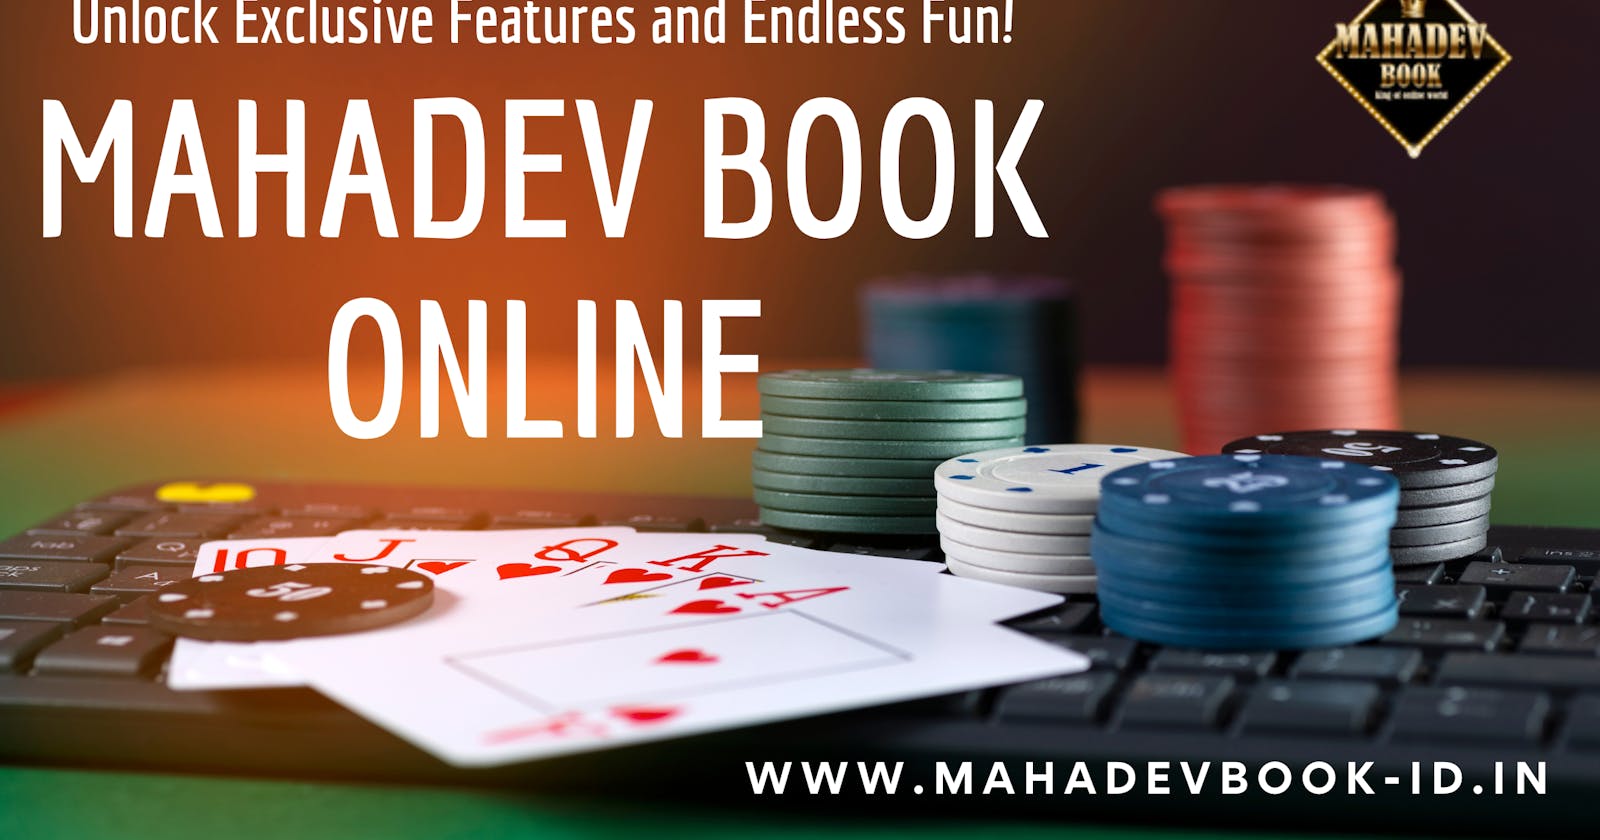 Discover Now: What is Mahadev Book Online? - Mahadev Book Online